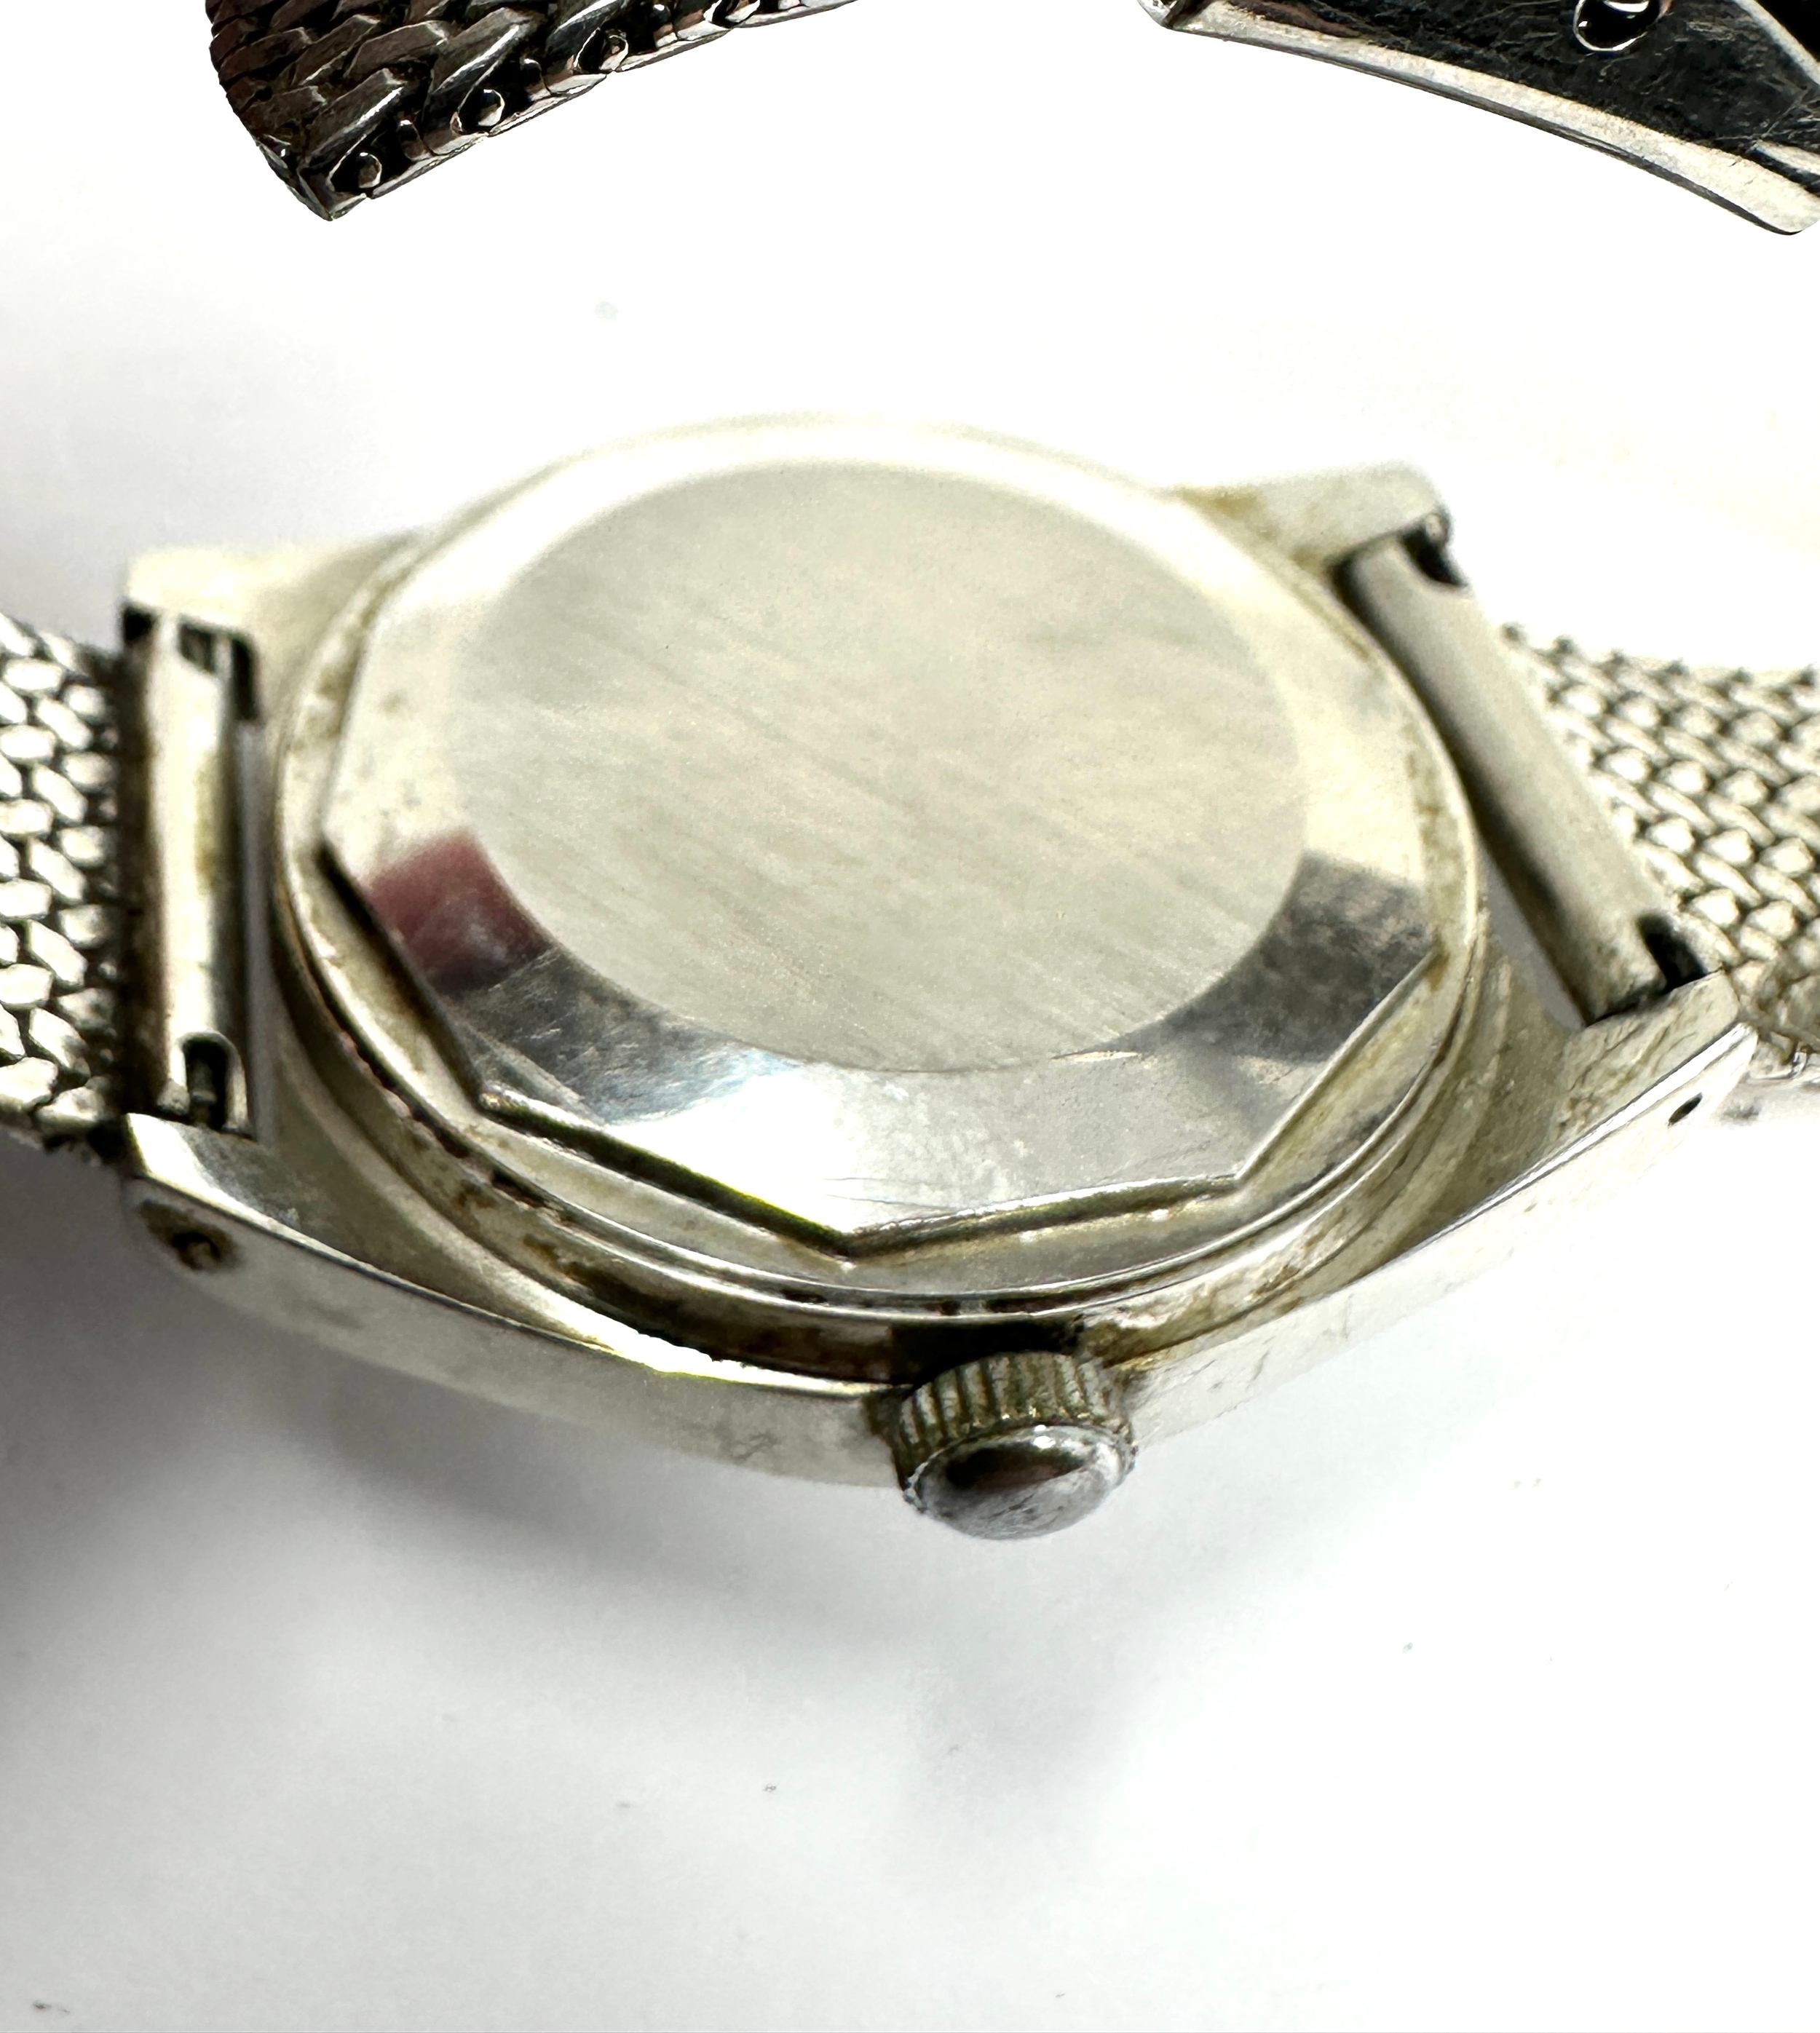 Vintage Tissot Automatic pr516 Date the watch is ticking - Image 4 of 4